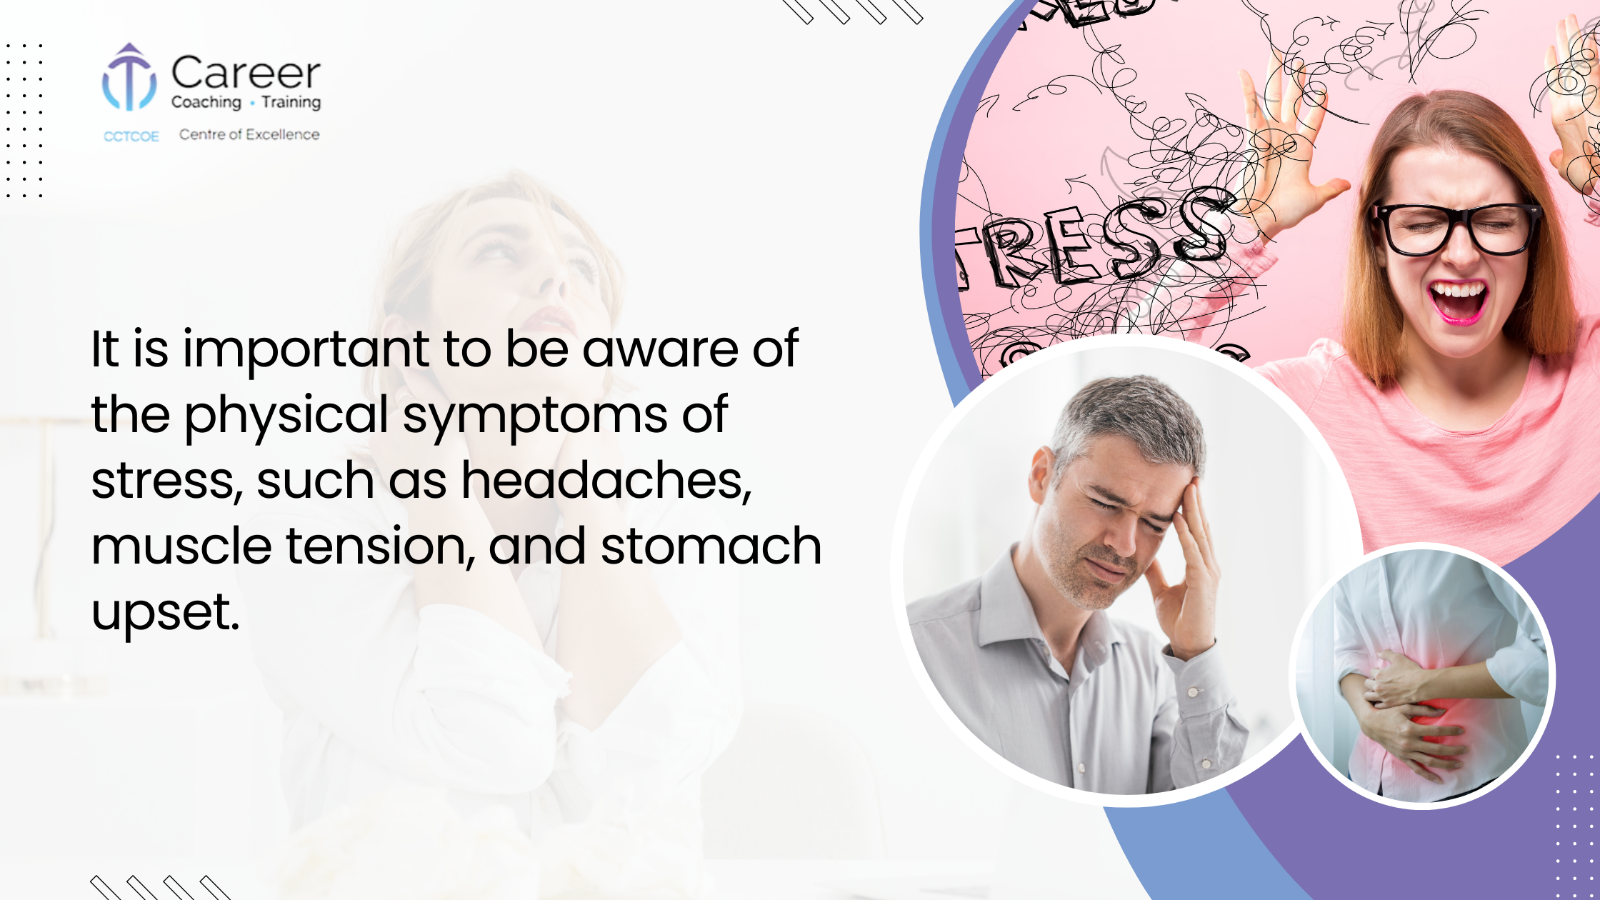 It is important to be aware of the physical symptoms of stress, such as headaches, muscle tension, and stomach upset.